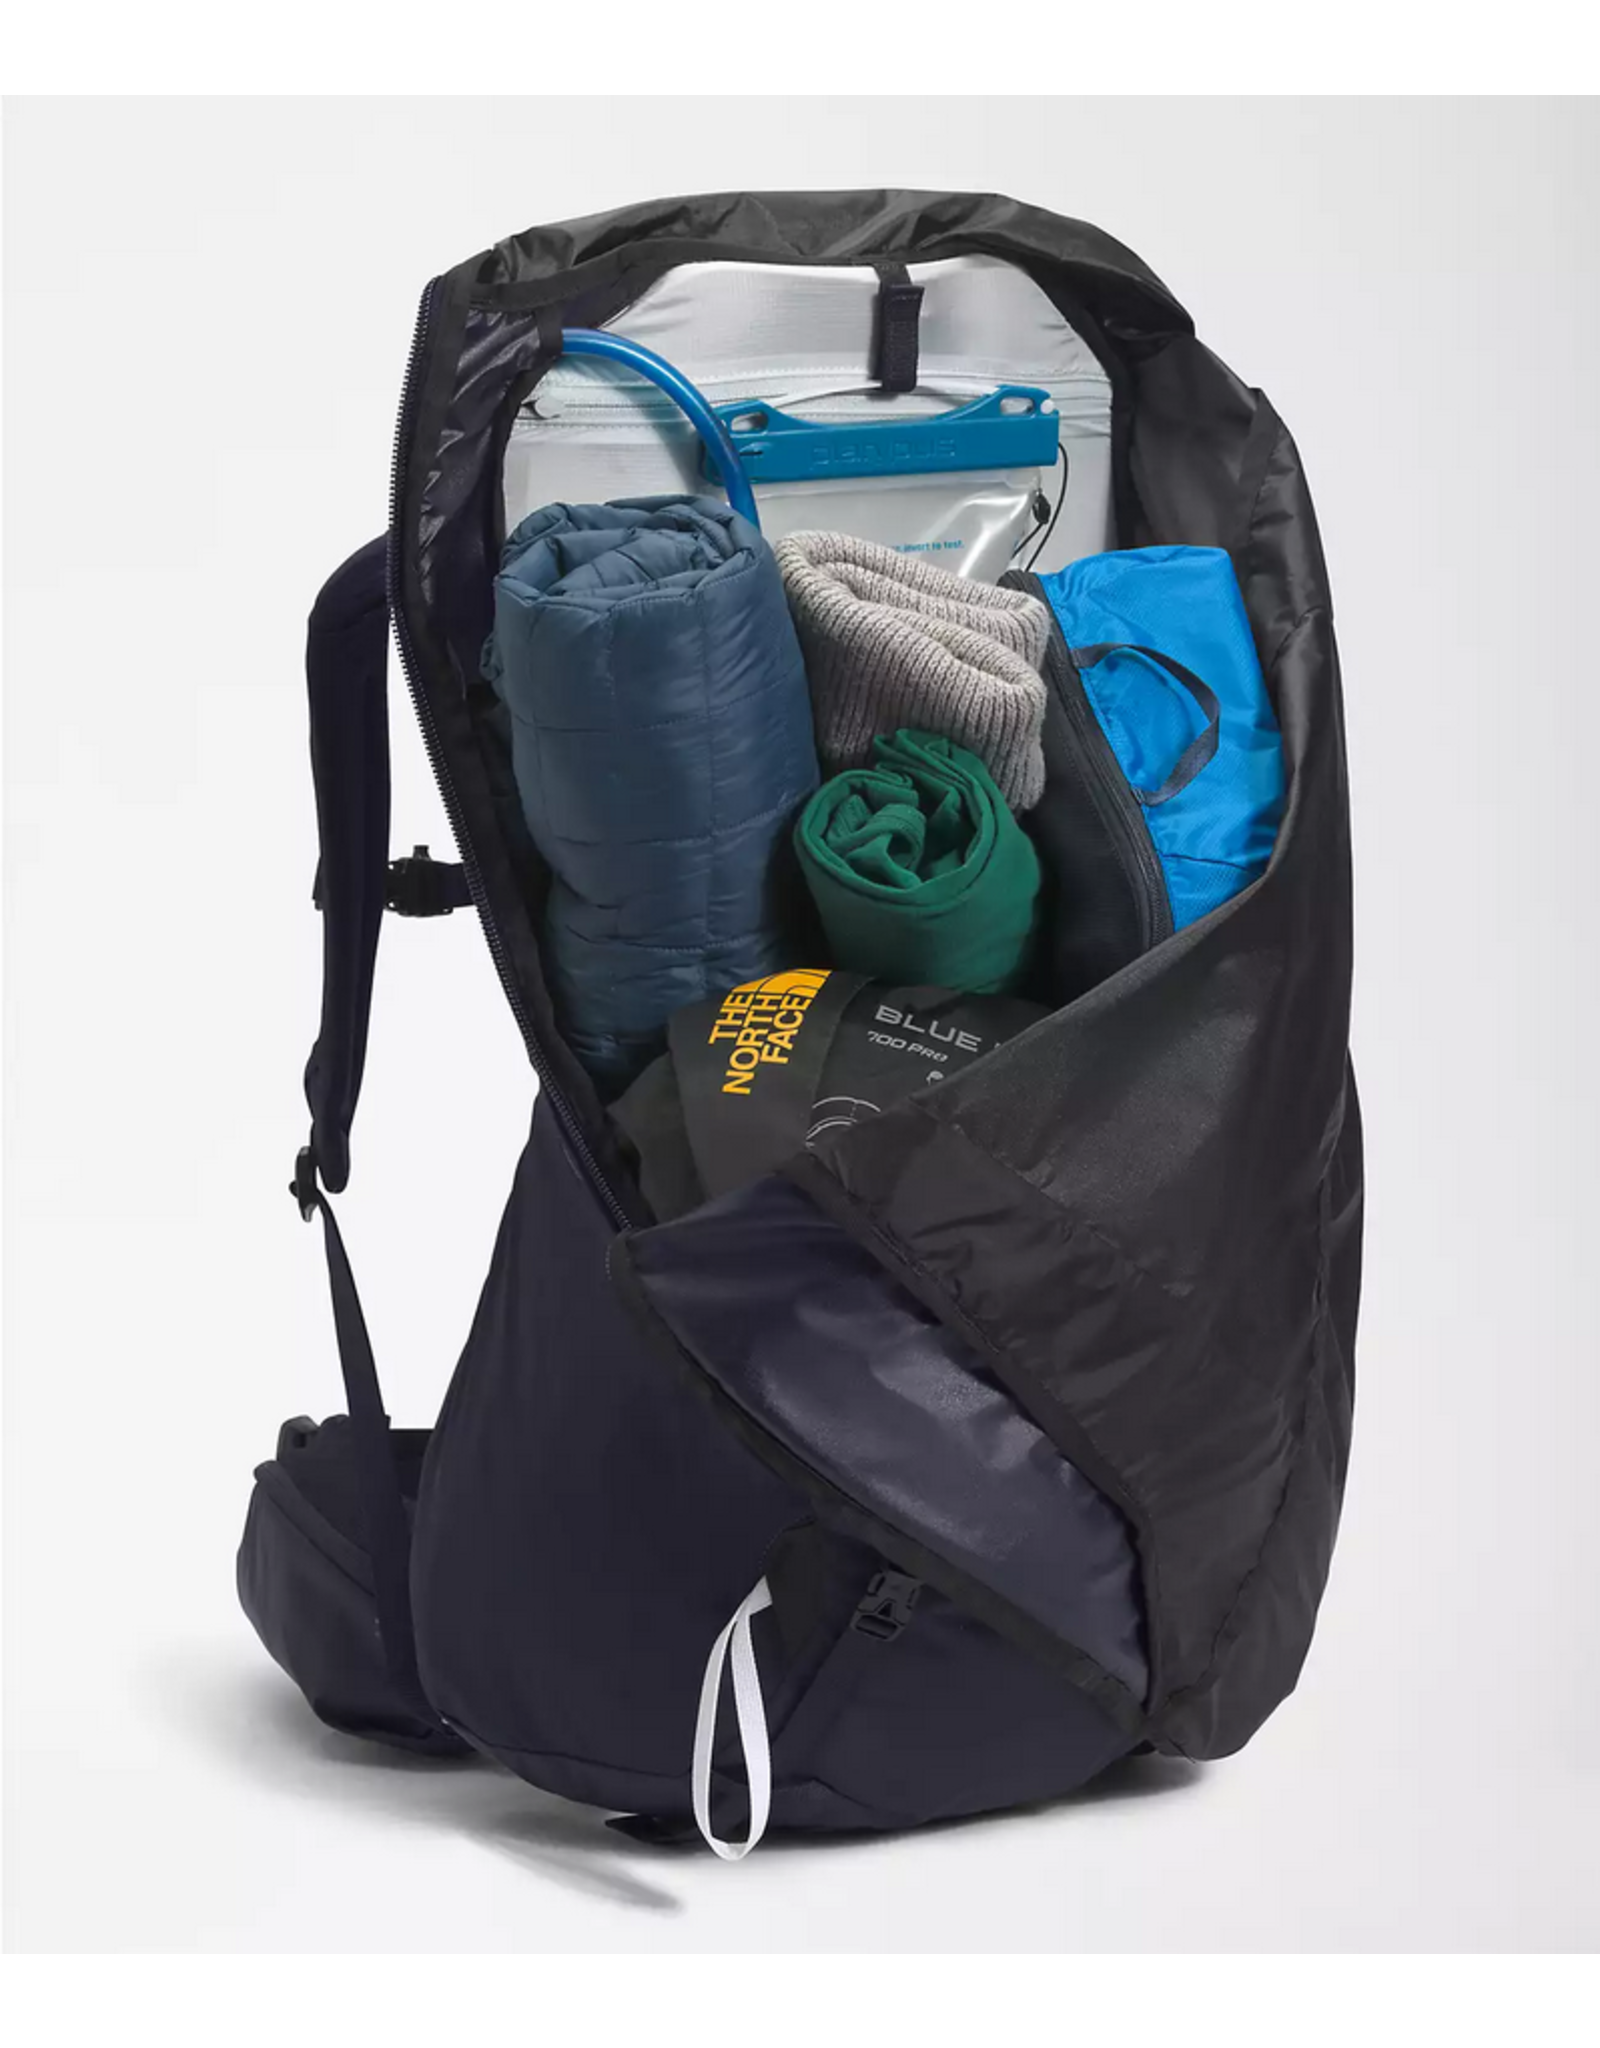 THE NORTH FACE GRIFFIN 75L